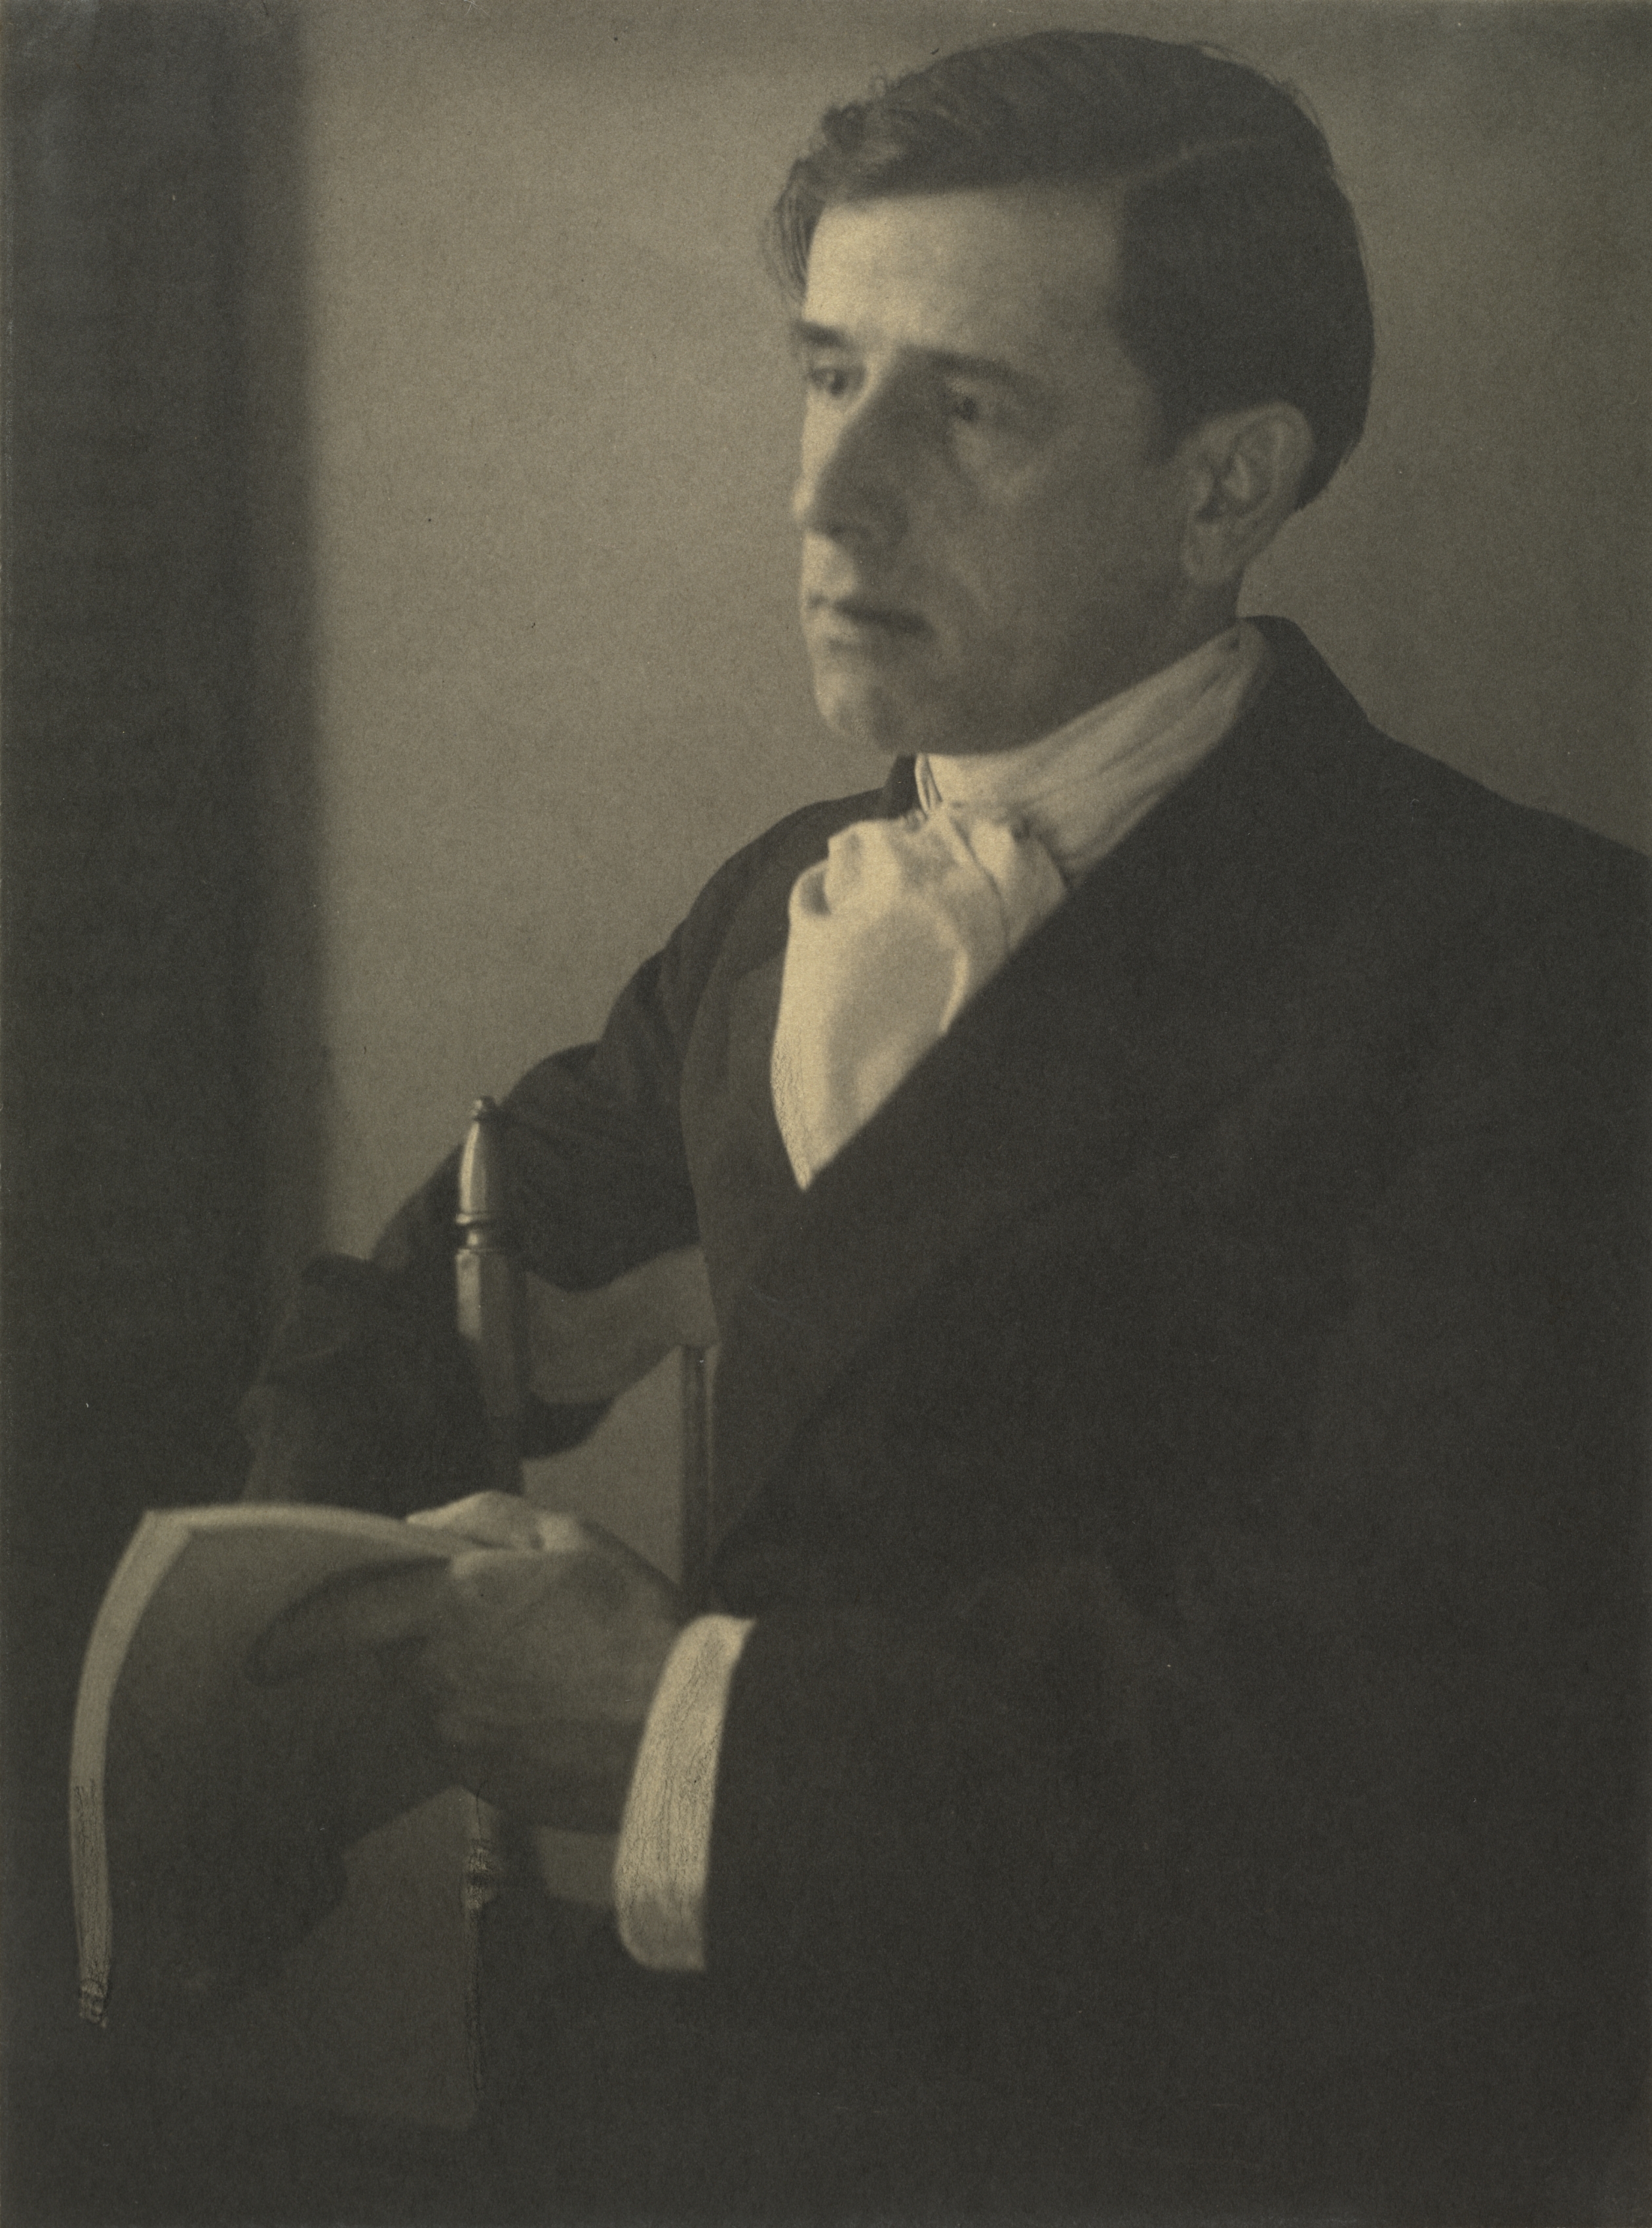 Portrait of Clarence H. White (1871-1925)